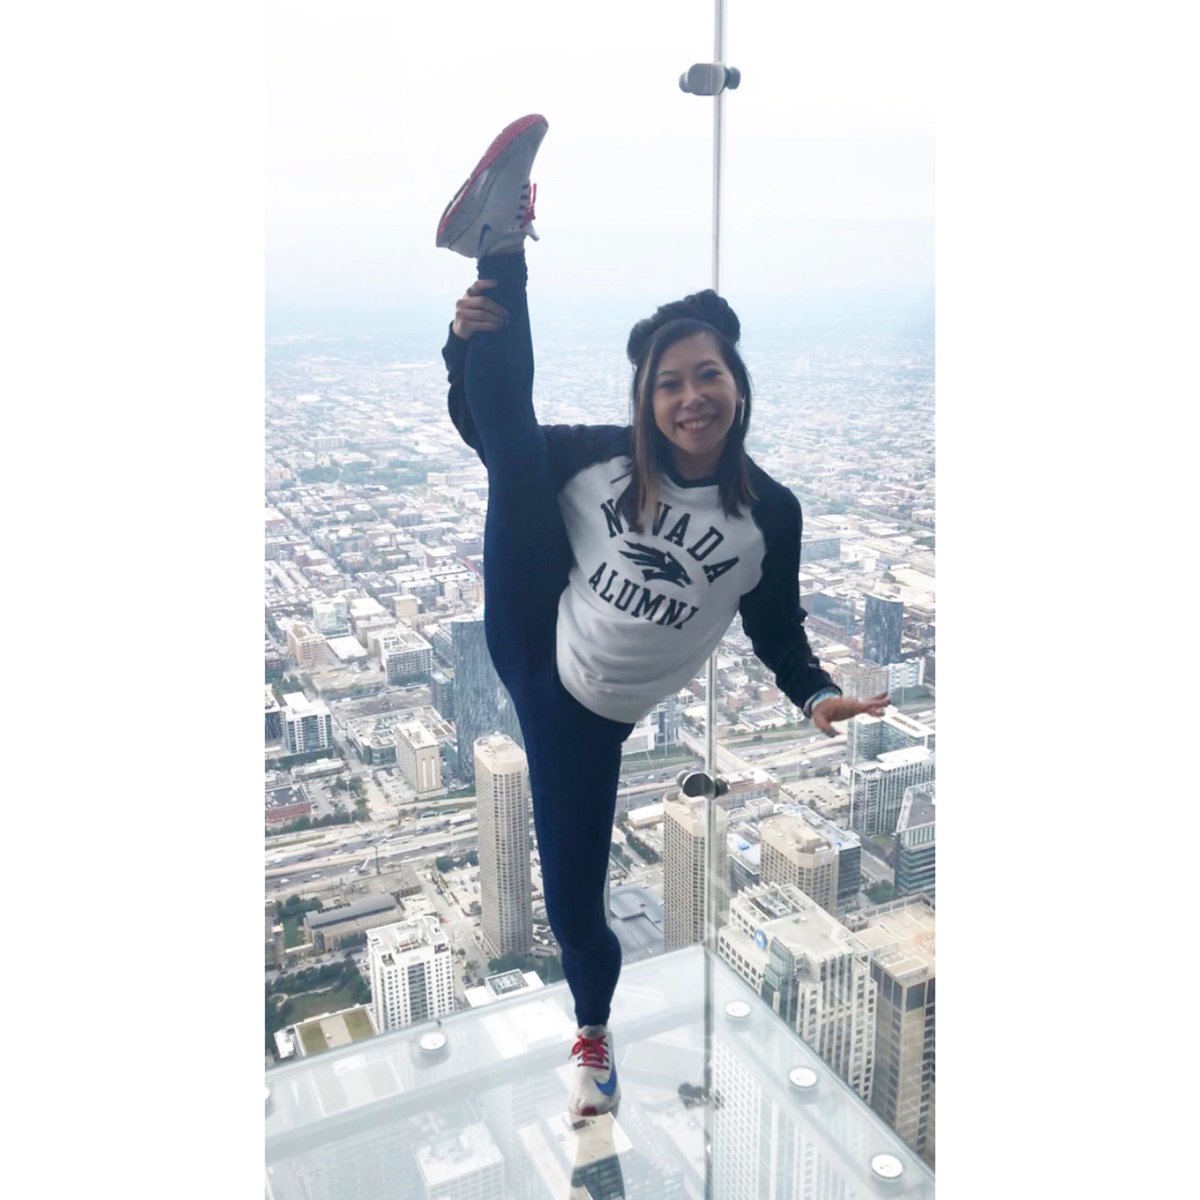 🌆🤸🏻‍♂️Me stretching out doing the splits stretch at the Ledge Sky Deck Chicago up on Willis Tower! 1,352 feet up on the 103rd floor on clear glass above the city!!🌇🌤☀️ # SkyDeckChicago # SkyDeckChicago # WillisTower # JumpSplits # Selfie # UNRnevadaAlumna # NevadaNative